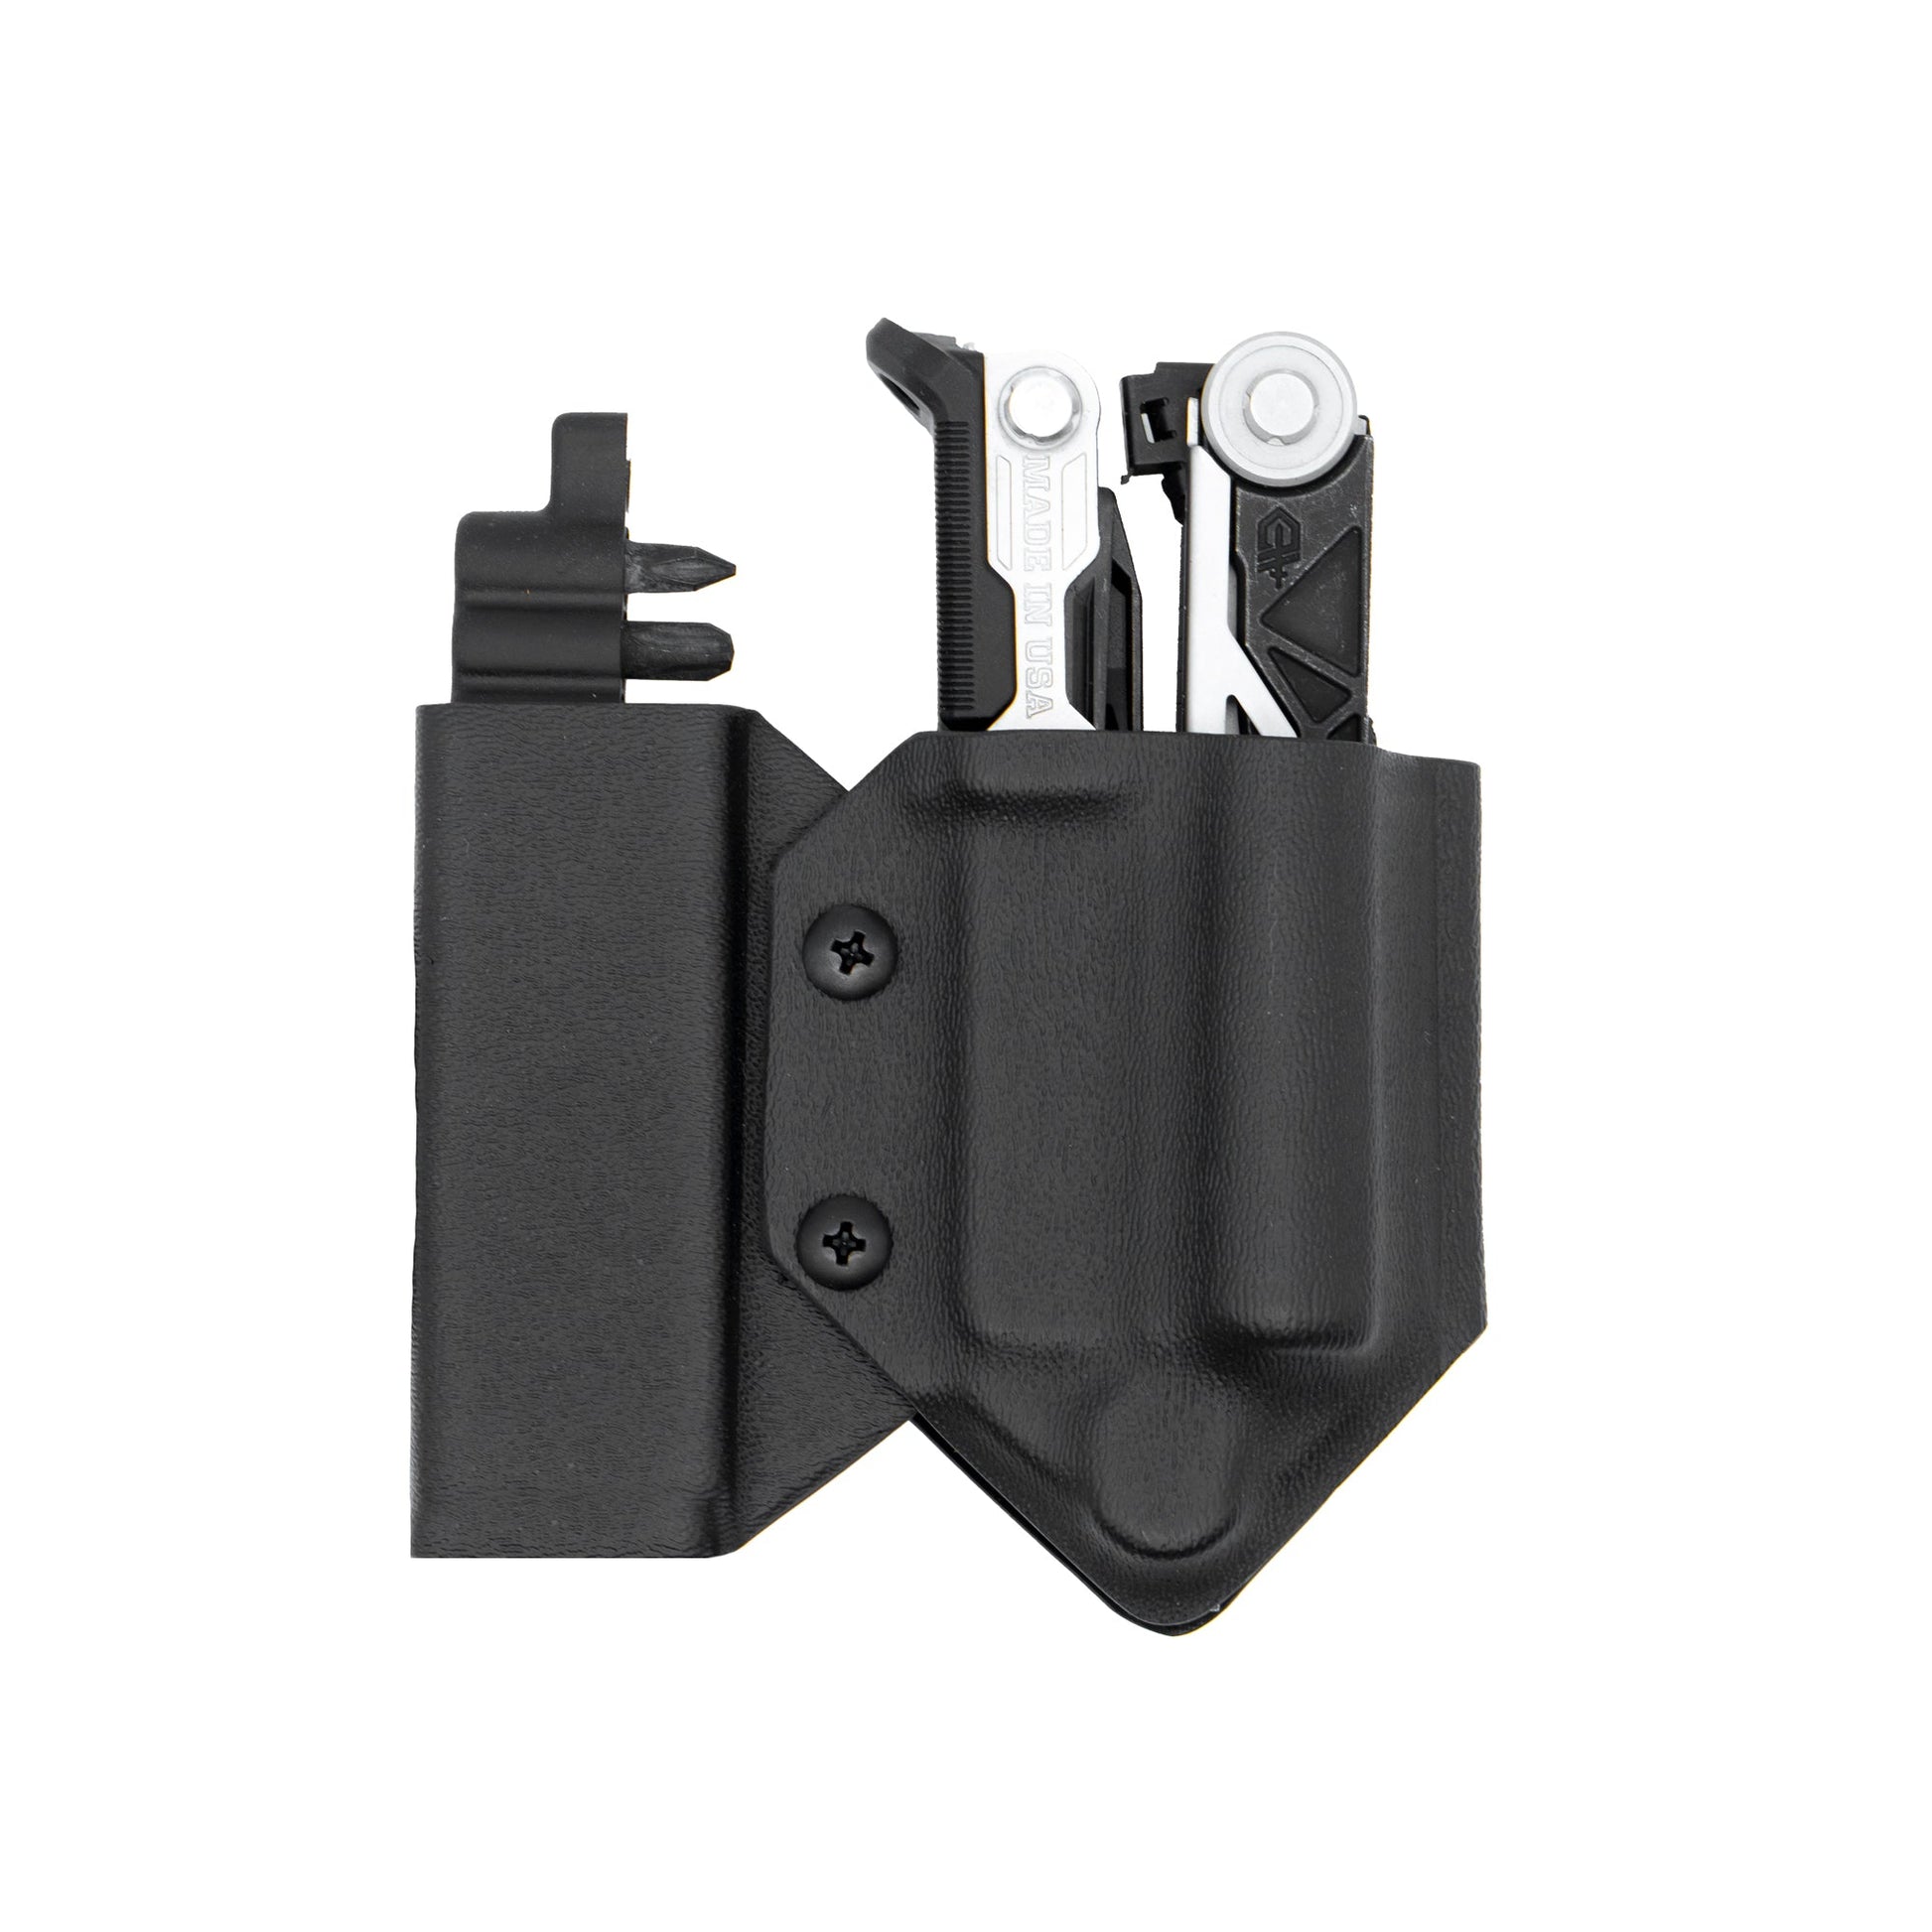 Kydex Sheath for the Gerber Center-Drive w/ Bit Sidecar Clip & Carry